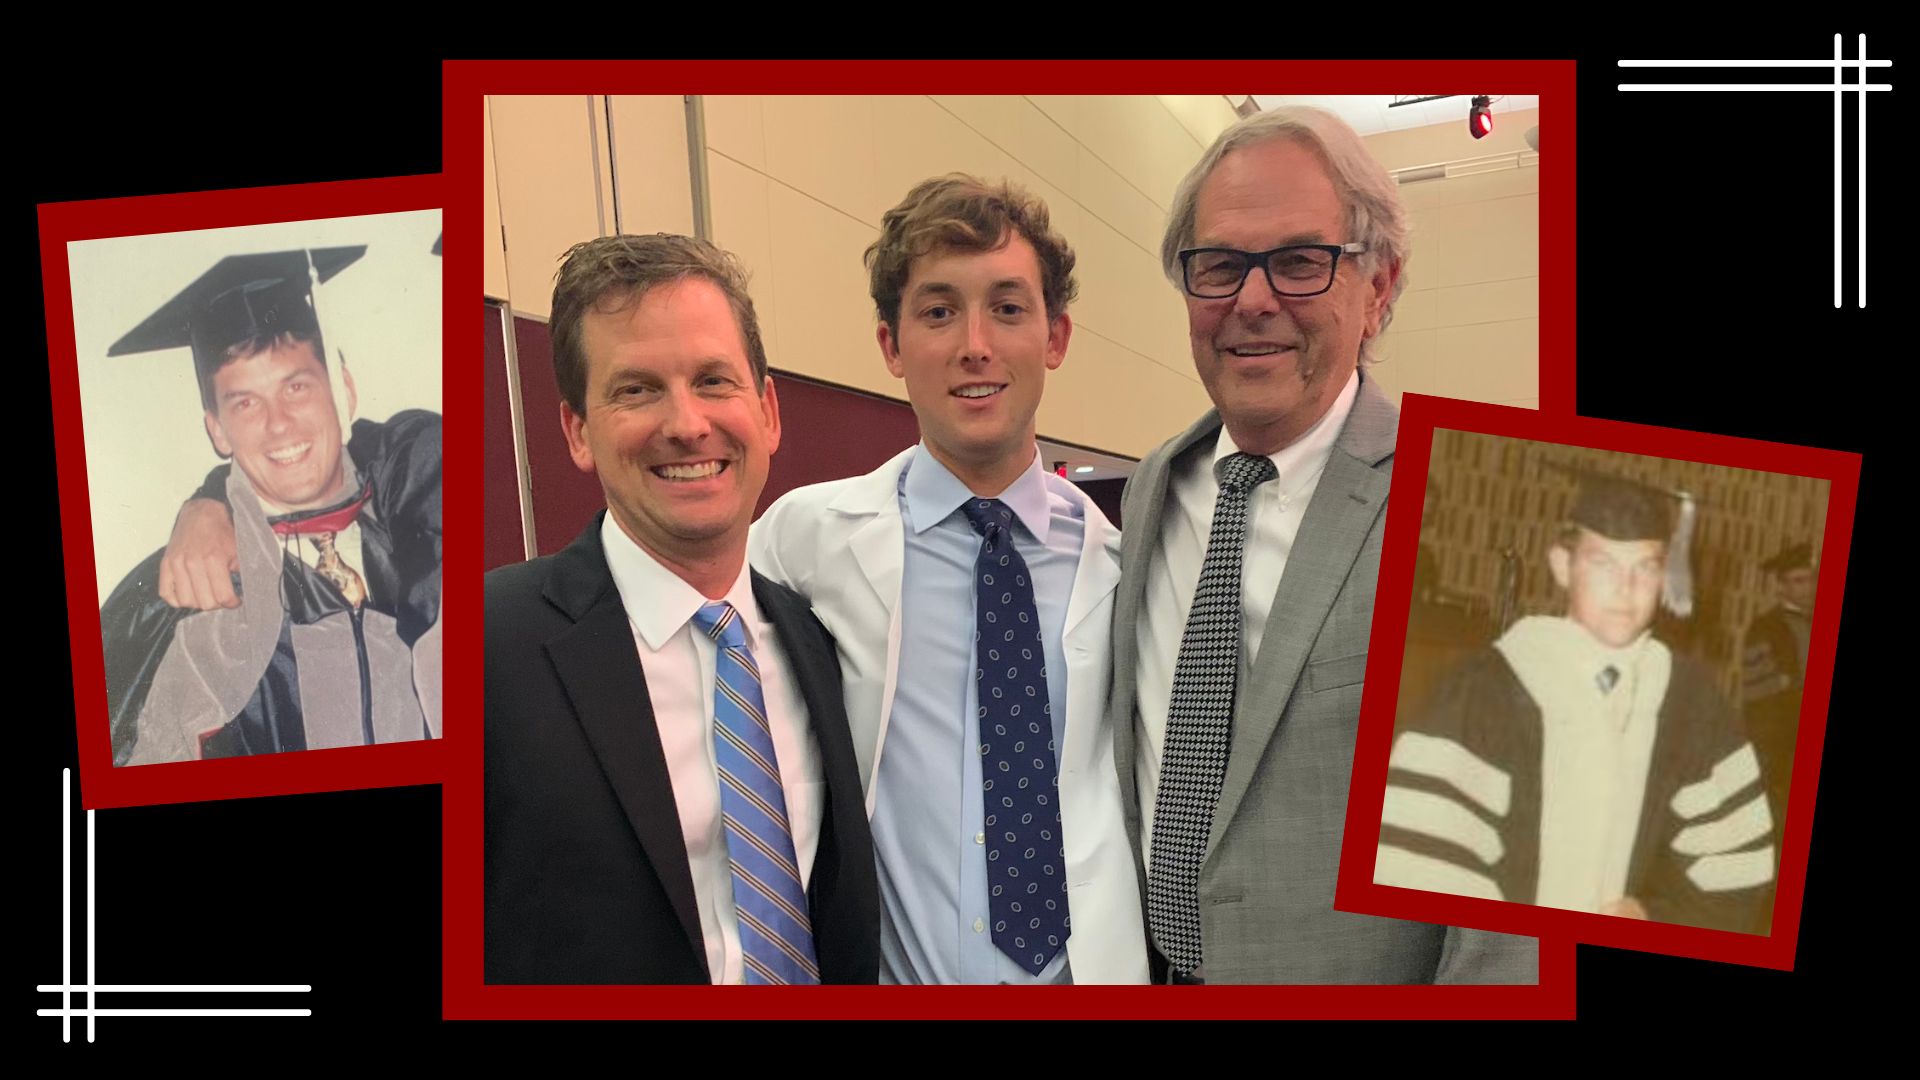 Gabe Steinman with his father and grandfather, both veterinarians